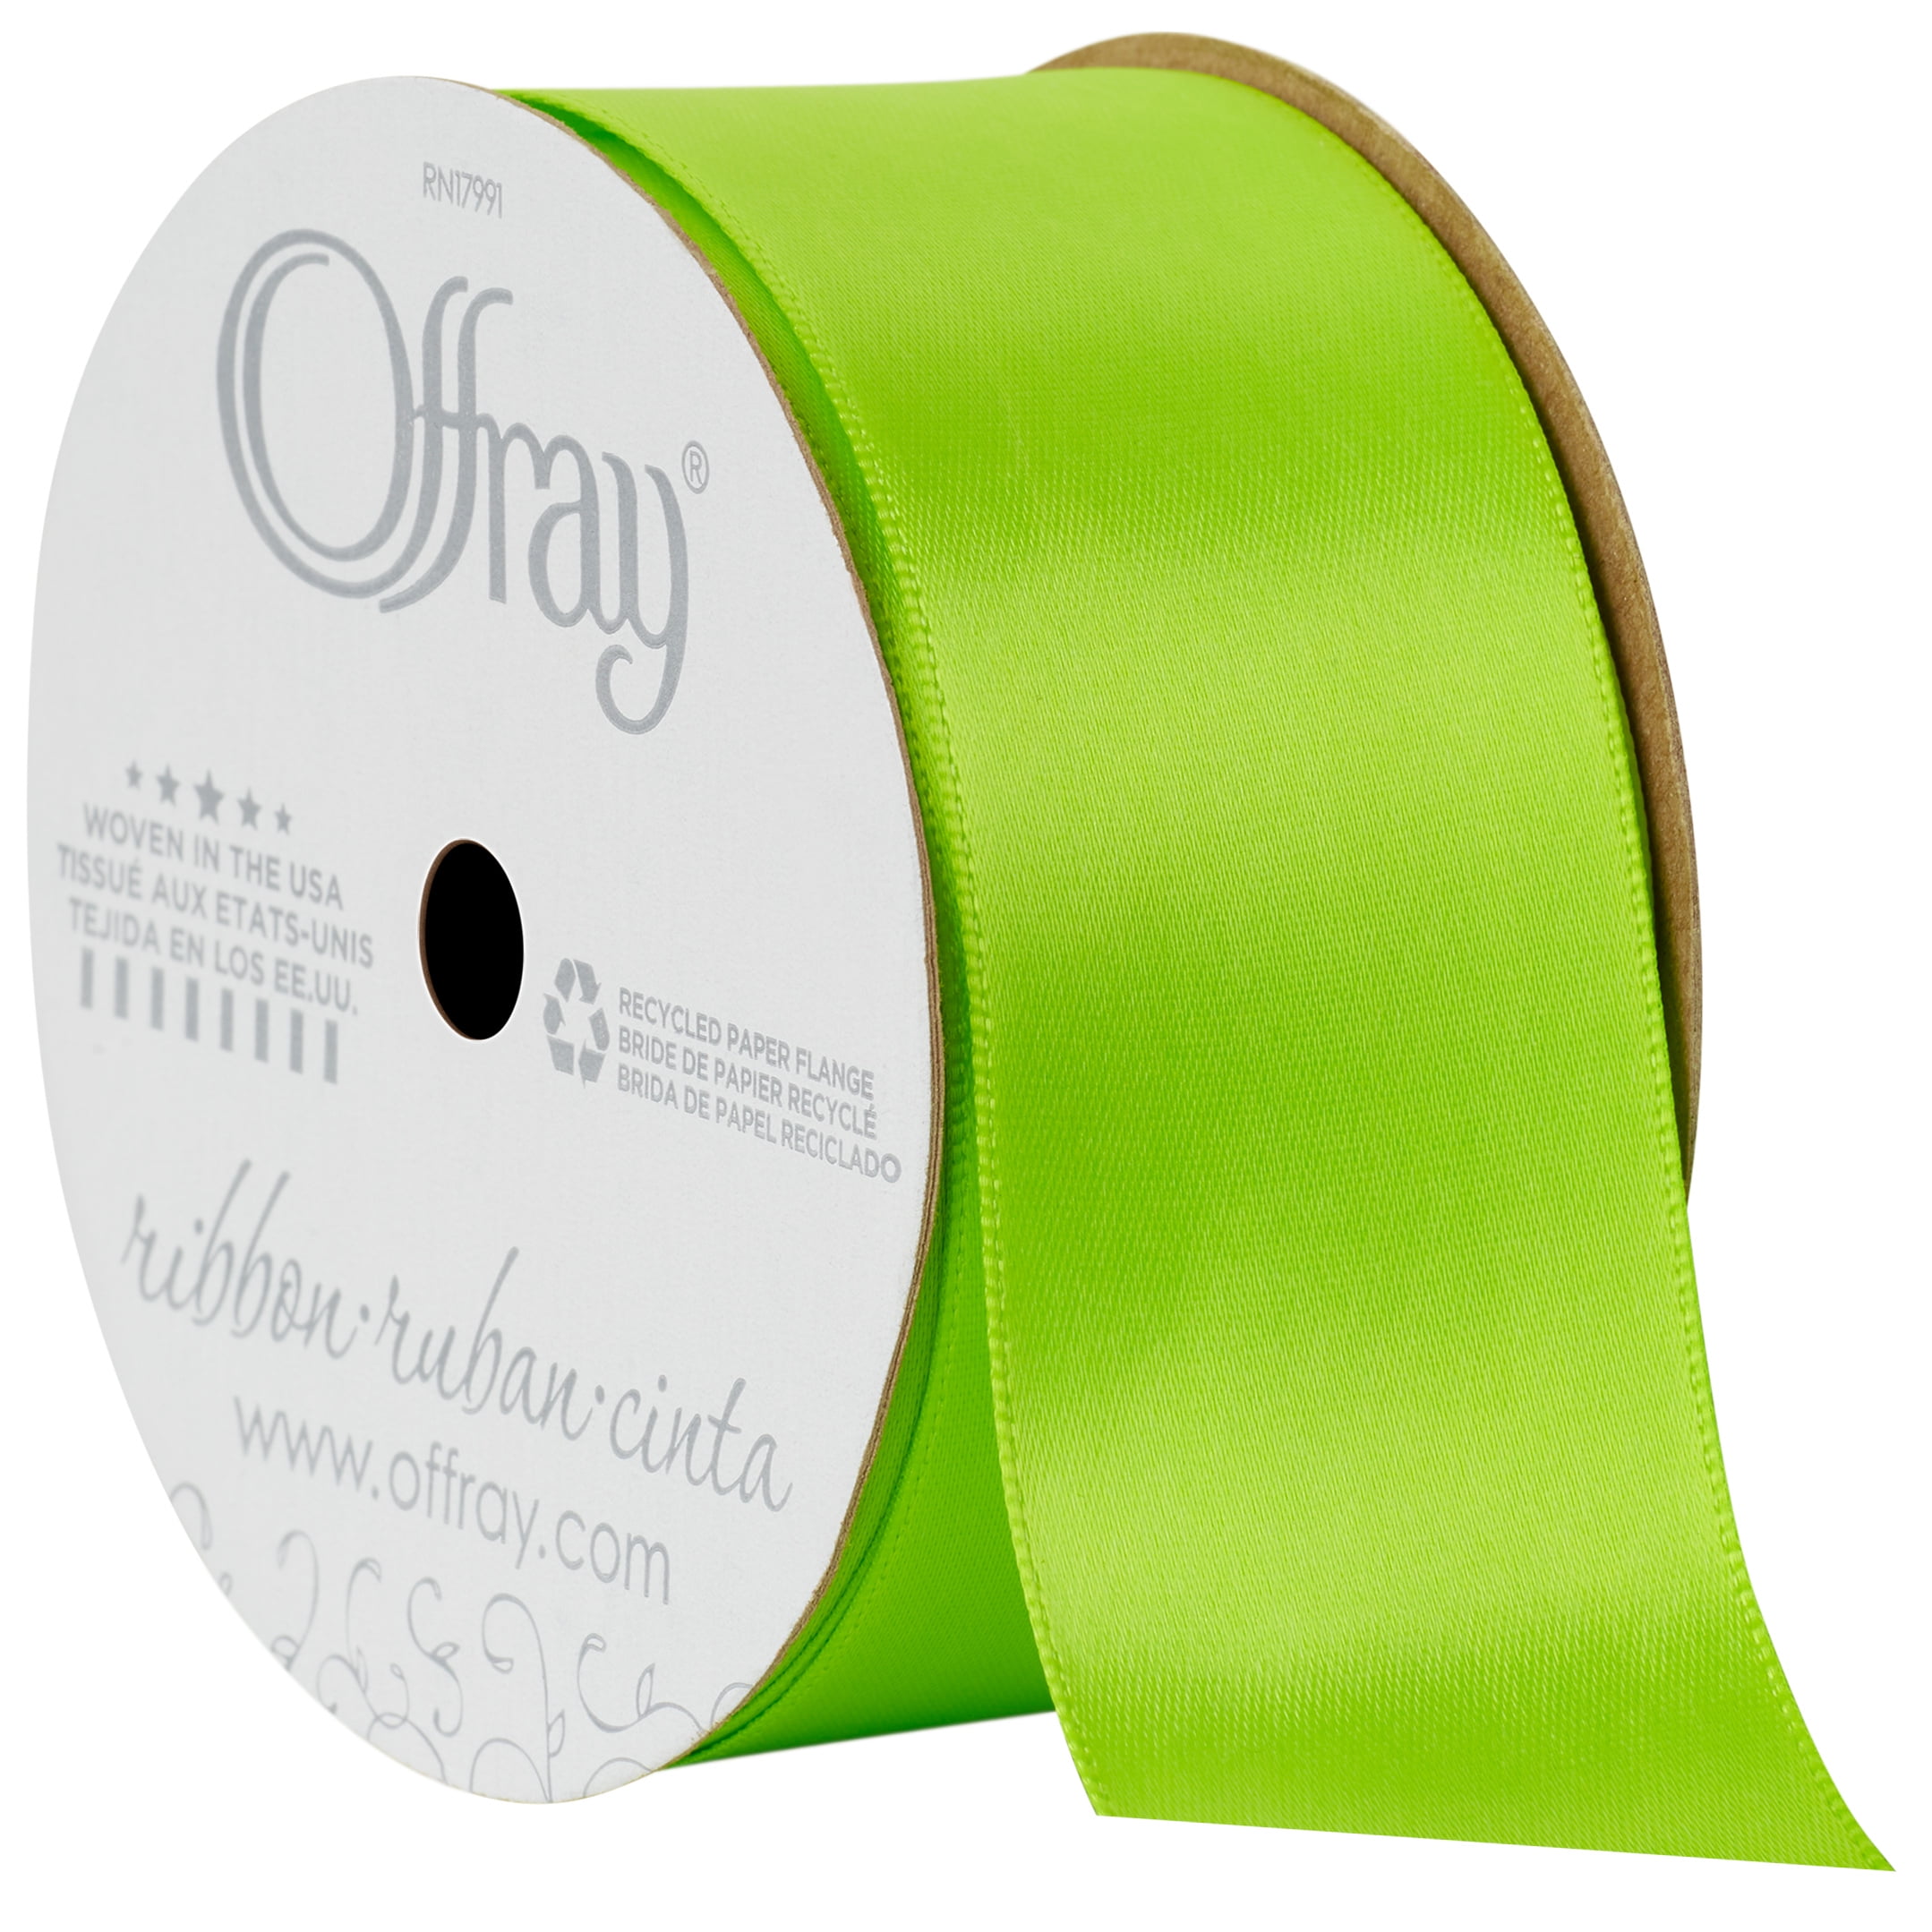 Offray Ribbon, Red 1 1/2 inch Double Face Satin Polyester Ribbon